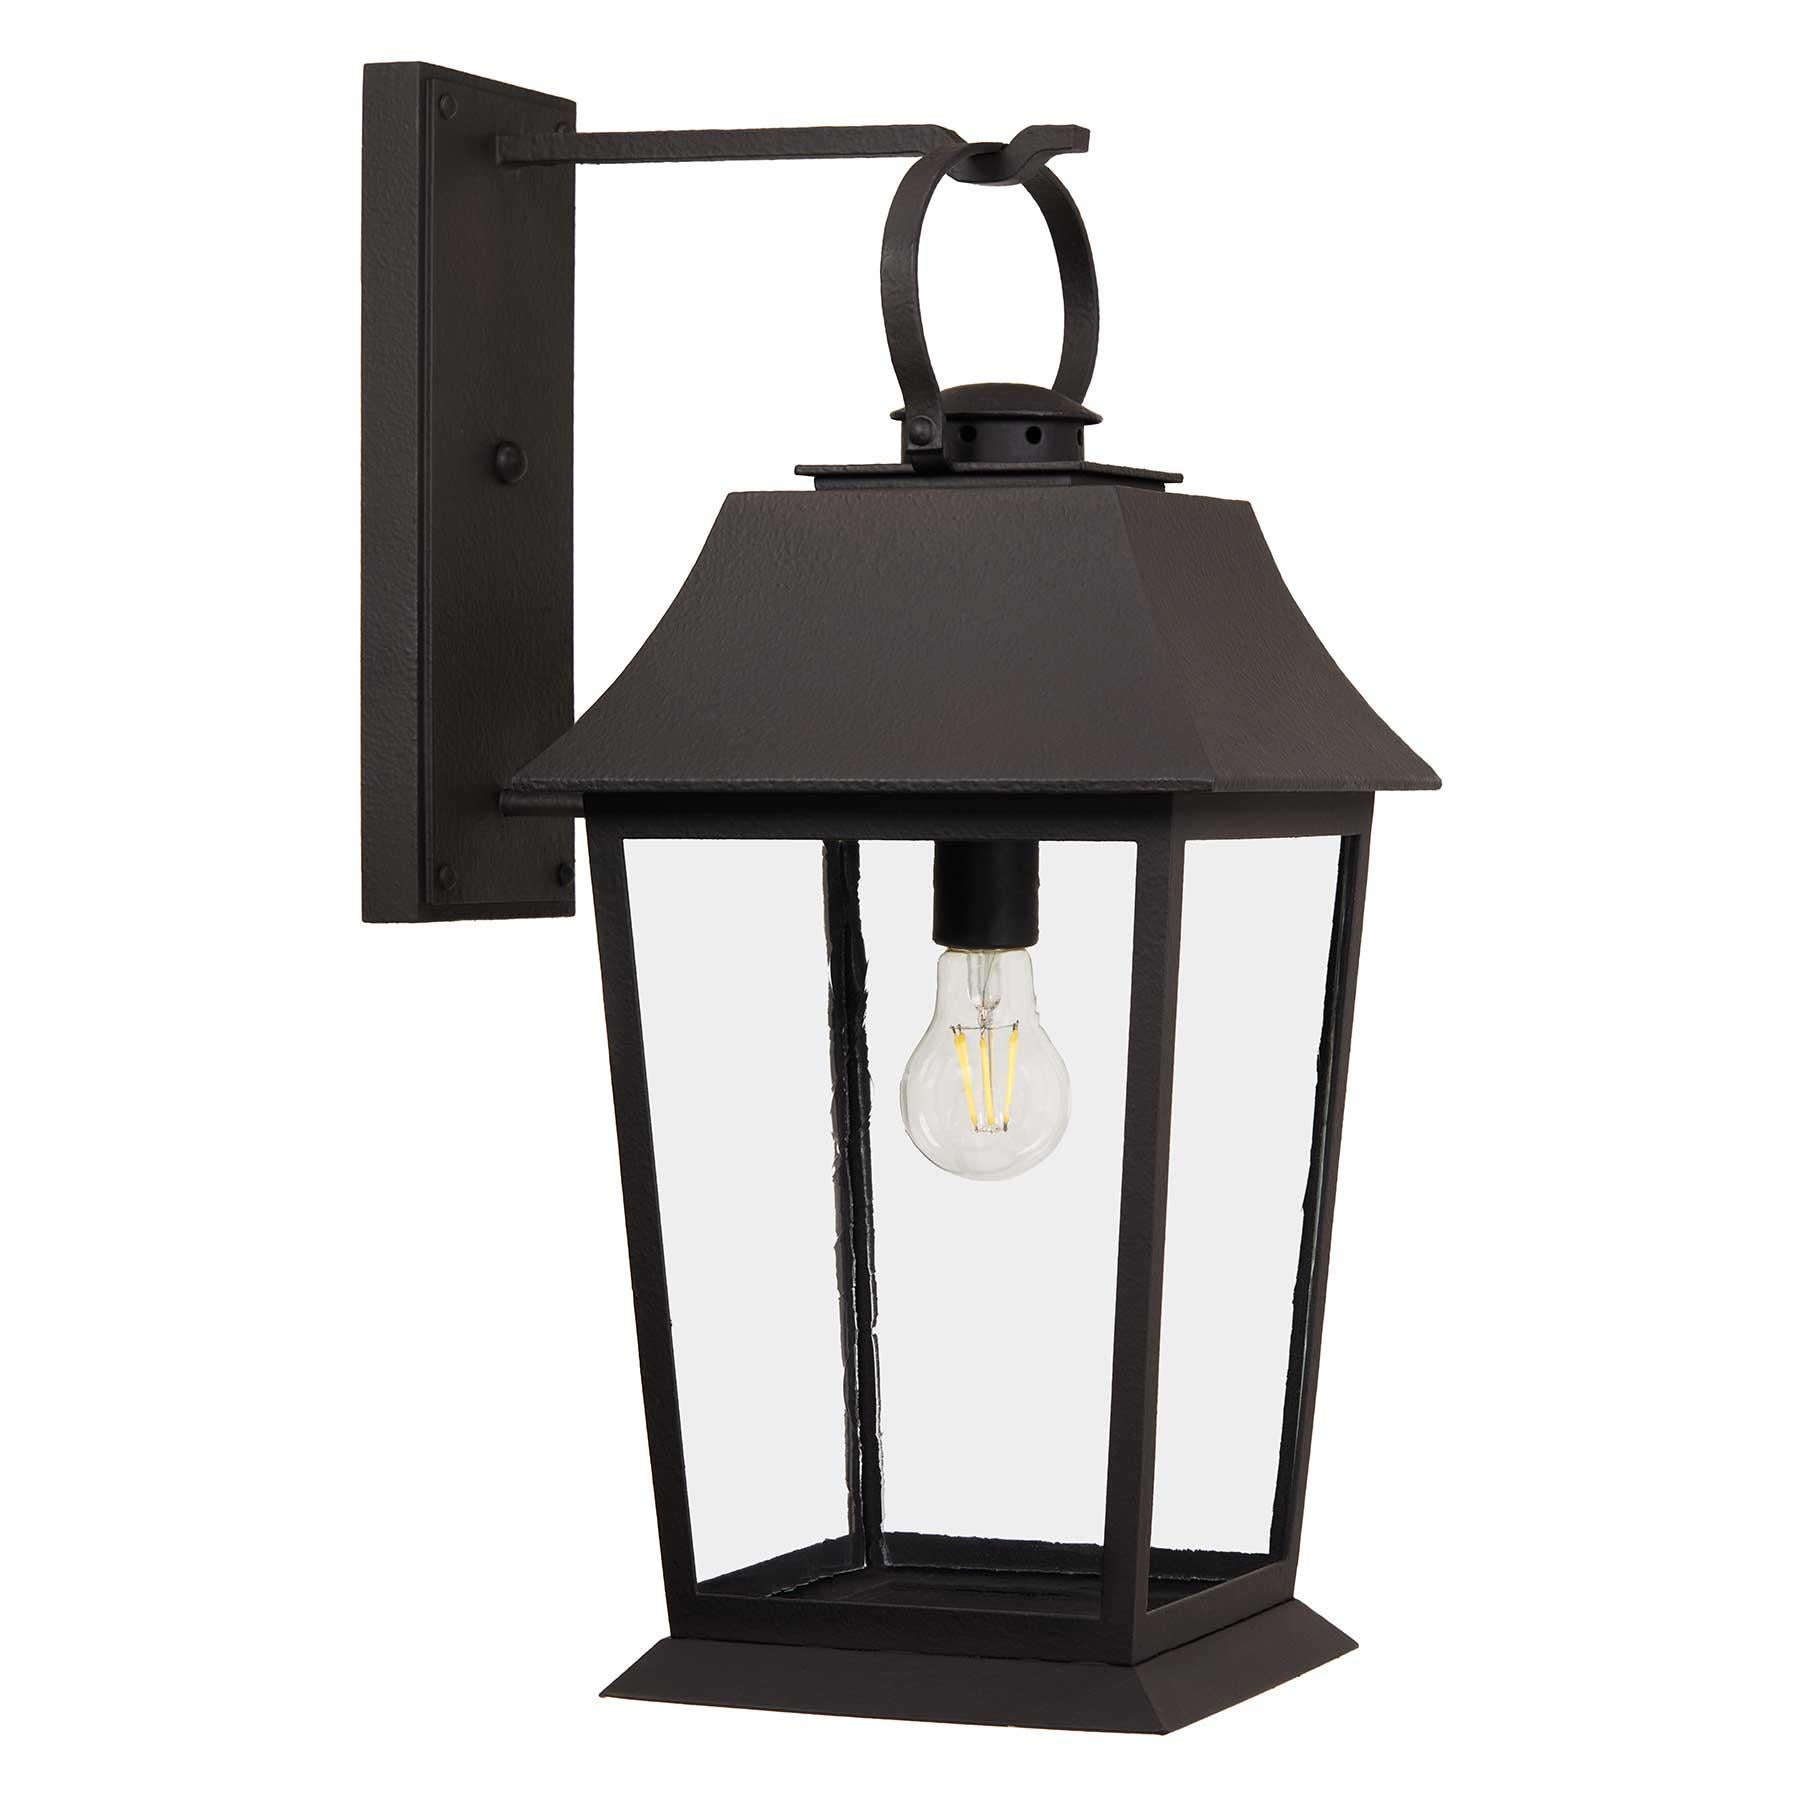 Forged American Colonial Handcrafted Wrought Iron Lantern, Old World, Antique Glass For Sale